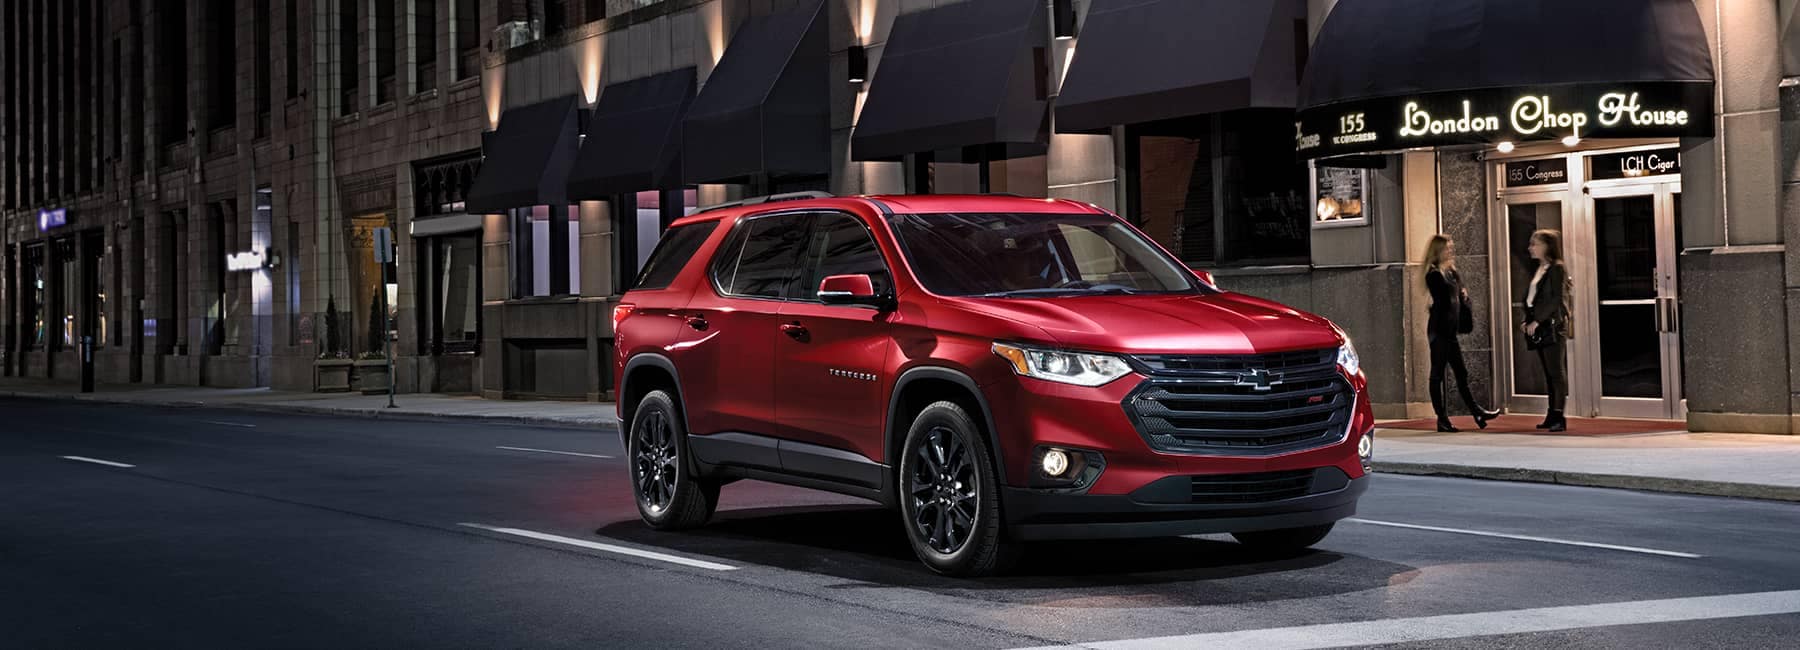 Red 2020 Chevrolet Traverse on a City St at Night